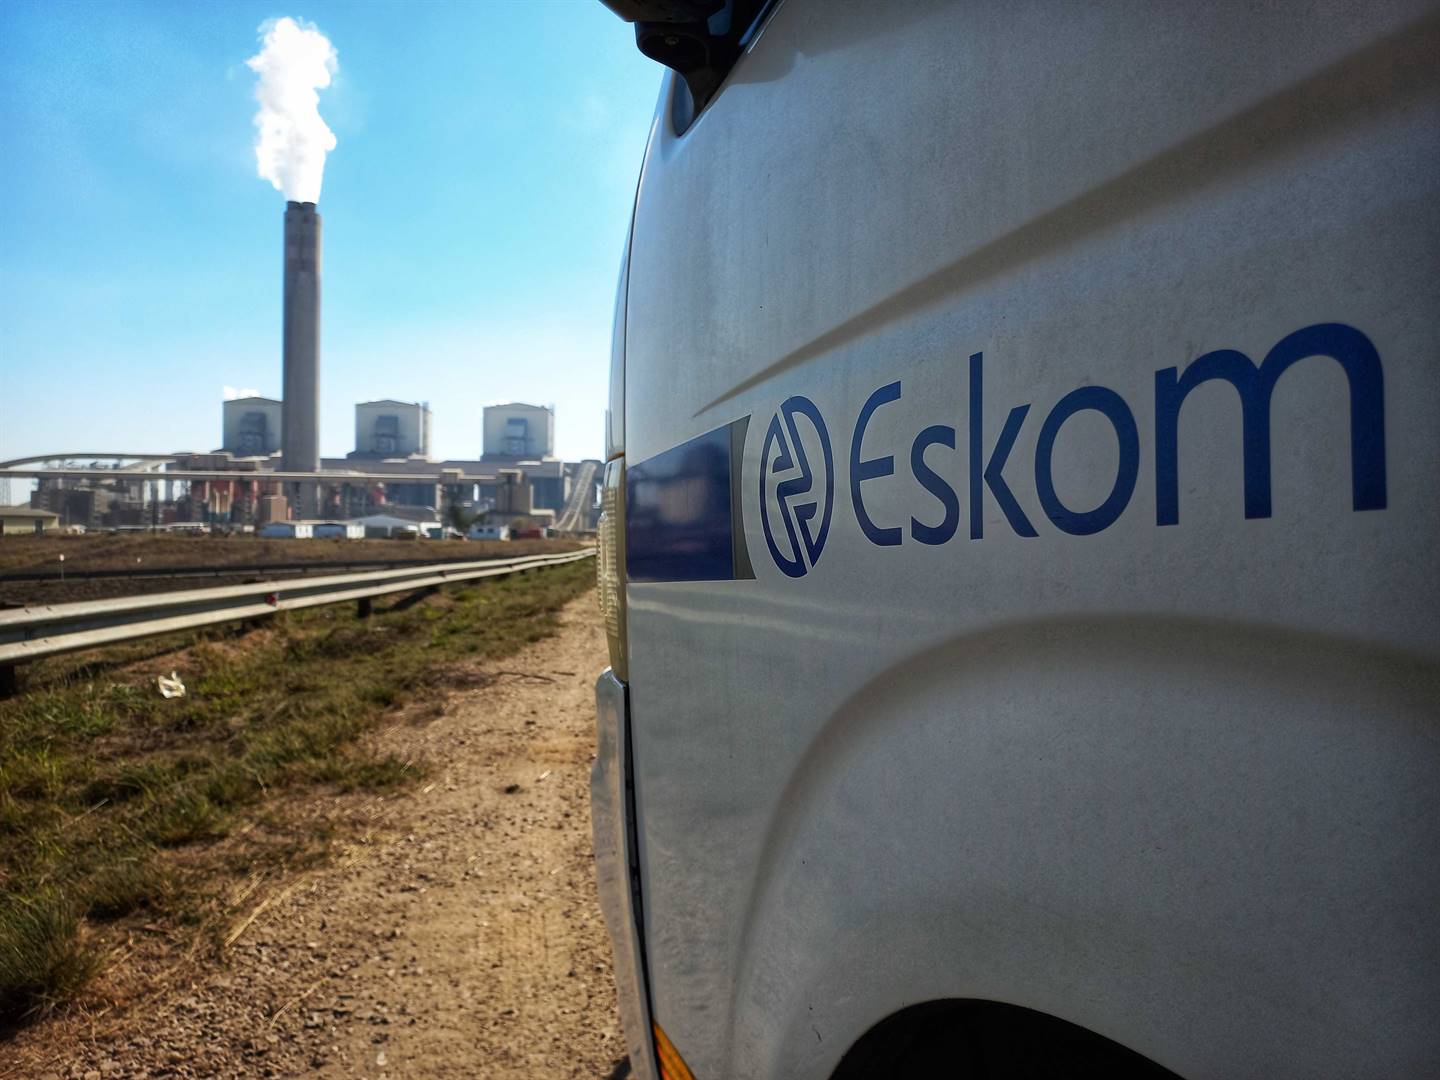 Officials apparently claim Eskom's skills drain has taken place without sufficient skills transfer.